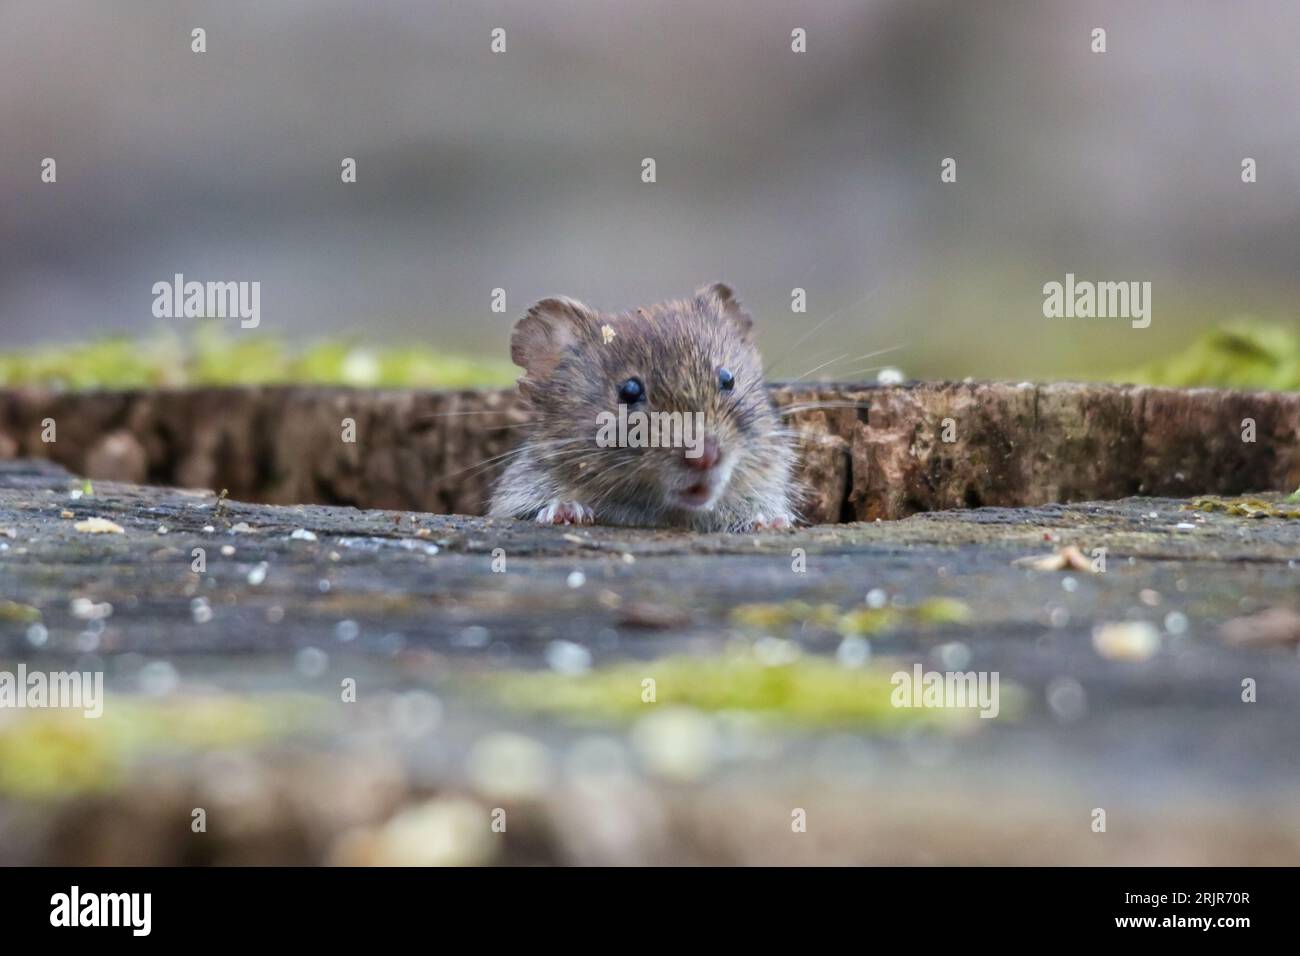 A pygmy field mouse on a stump surveying its surroundings. Stock Photo